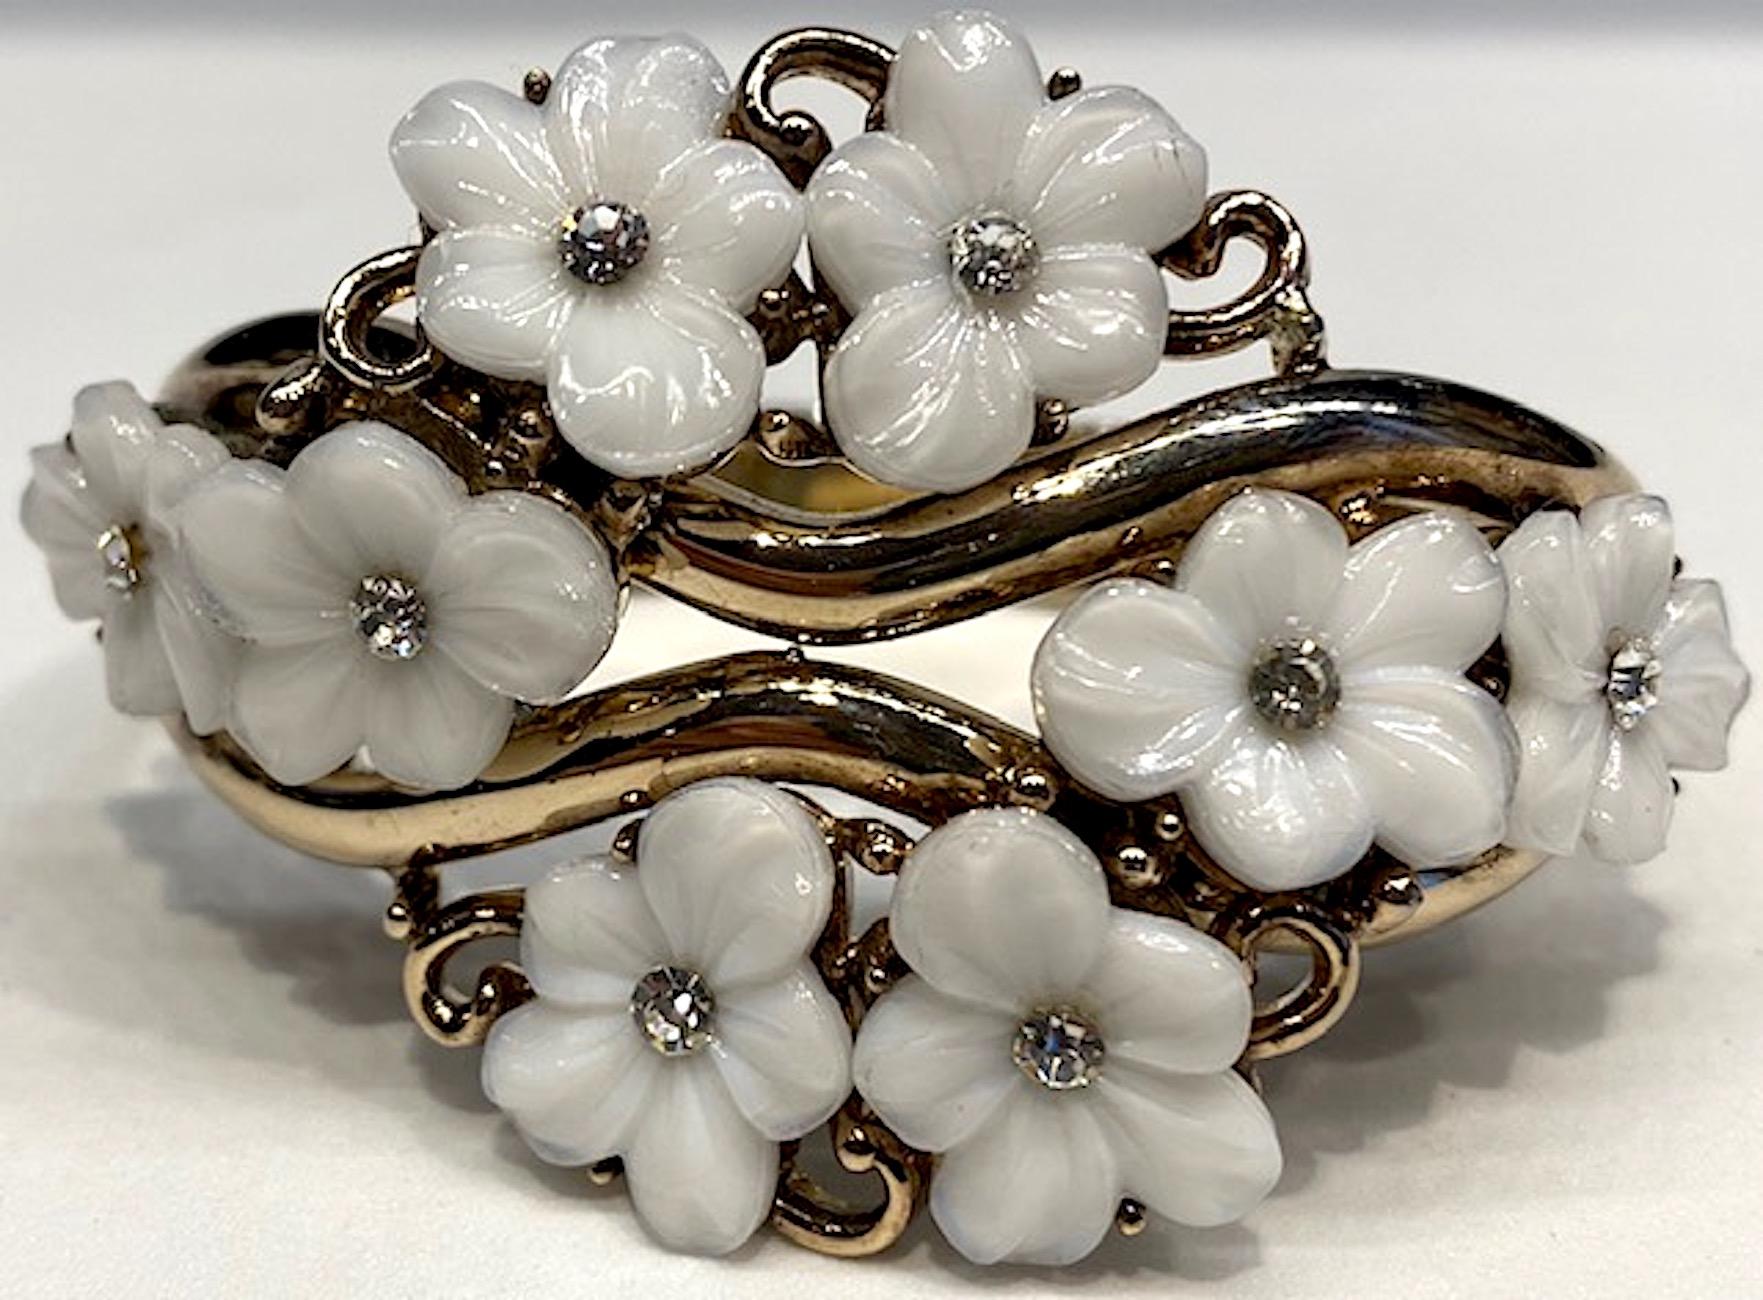 A beautifully constructed Trifari gold tone bangle with molded glass flowers with rhinestone accent by head designer Alfred Philippe. Patented design in 1951. Eight lovely white molded glass flowers are set into a rigid gold bangle with decorative